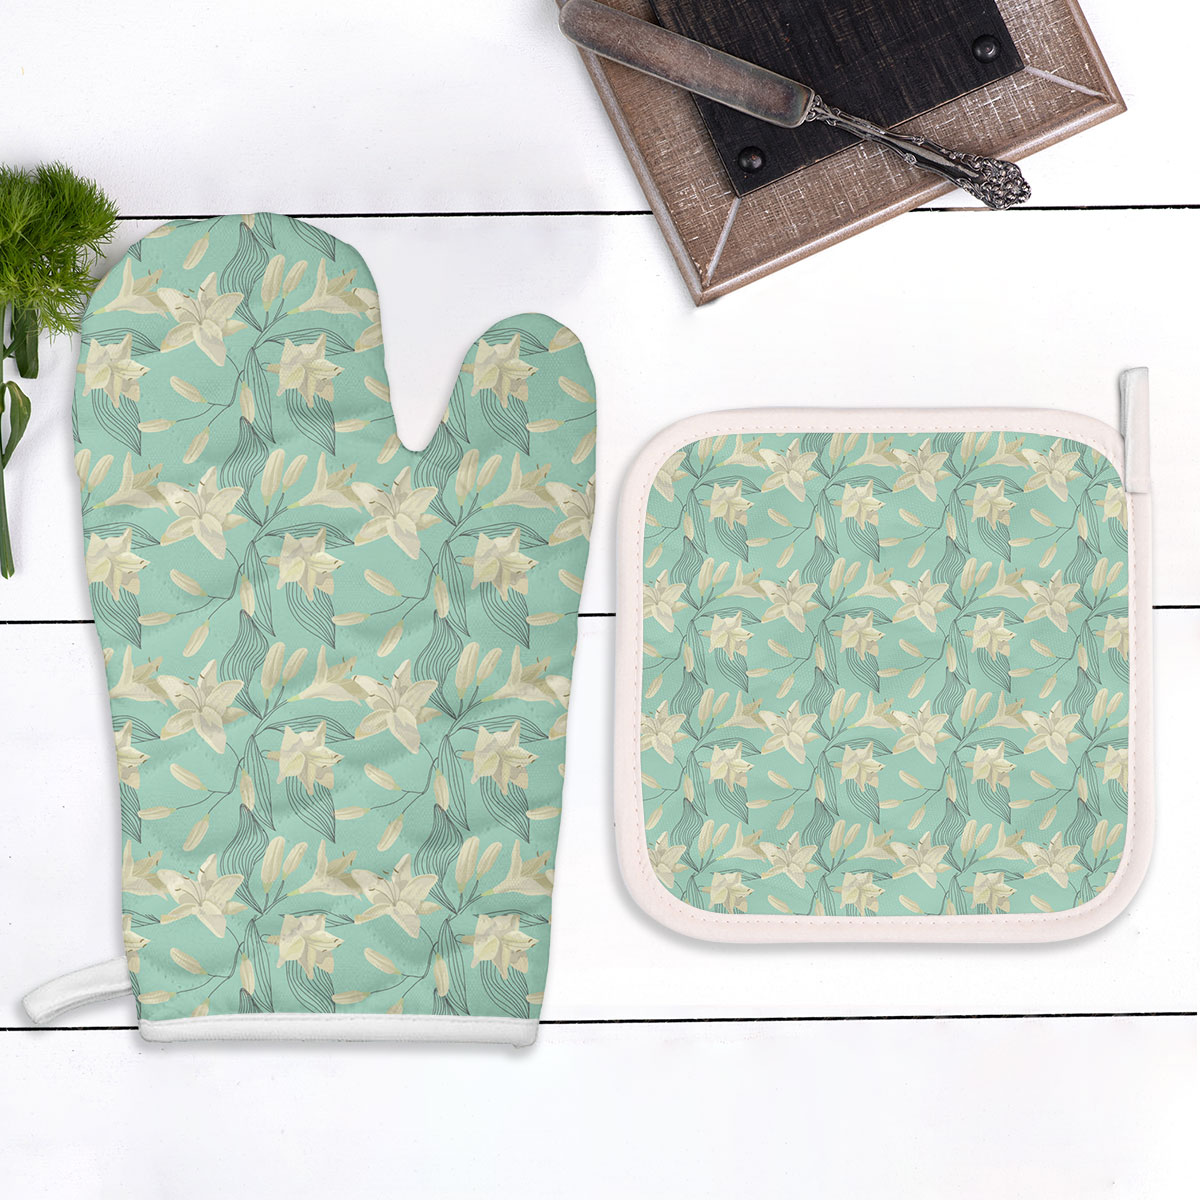 Tropical Lily FLowers Oven Mitts Pot Holder Set